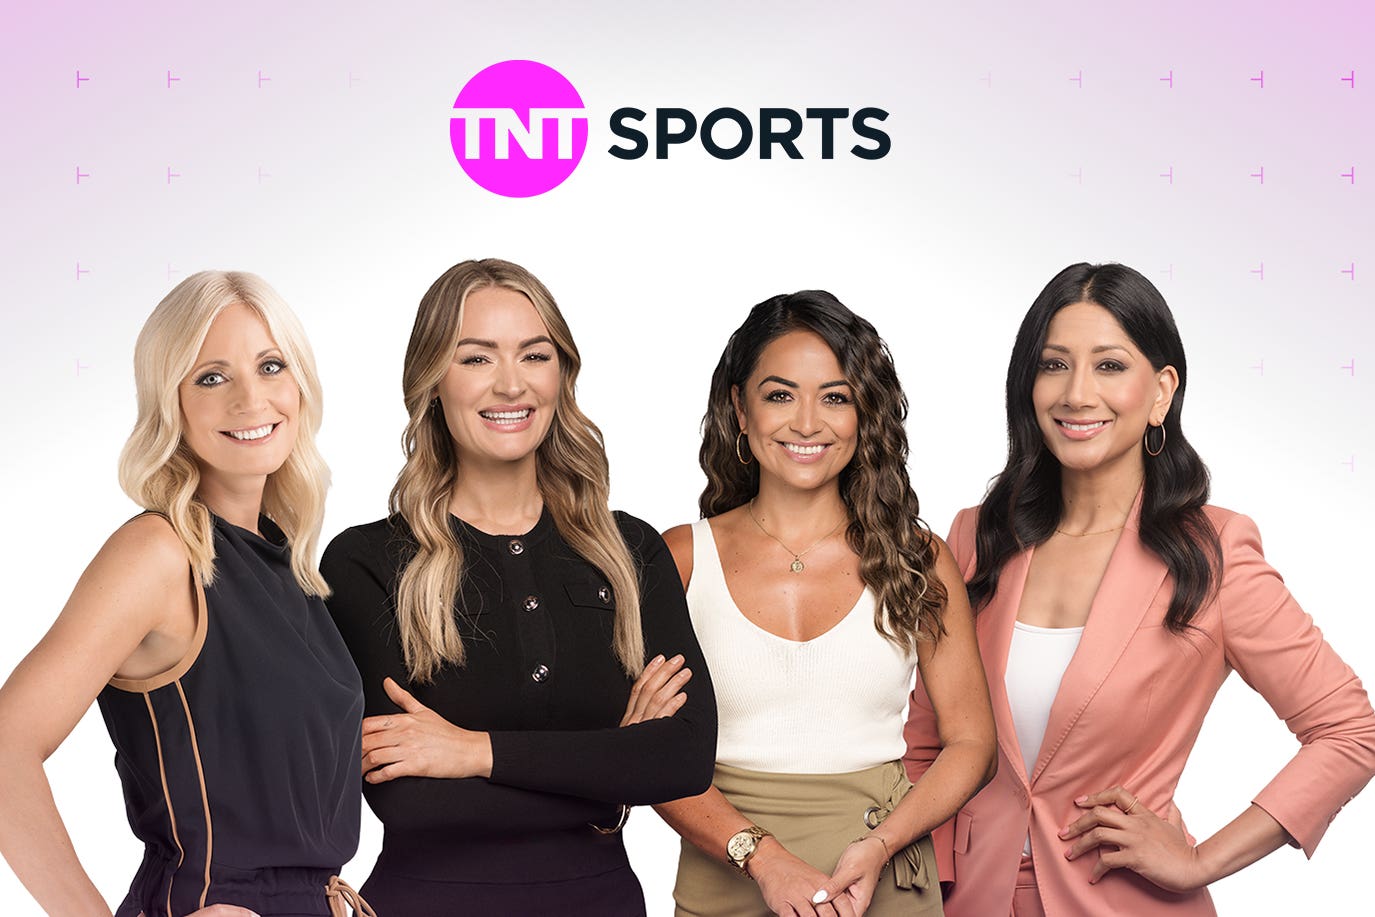 Historic allfemale lineup to present TNT Sports football coverage